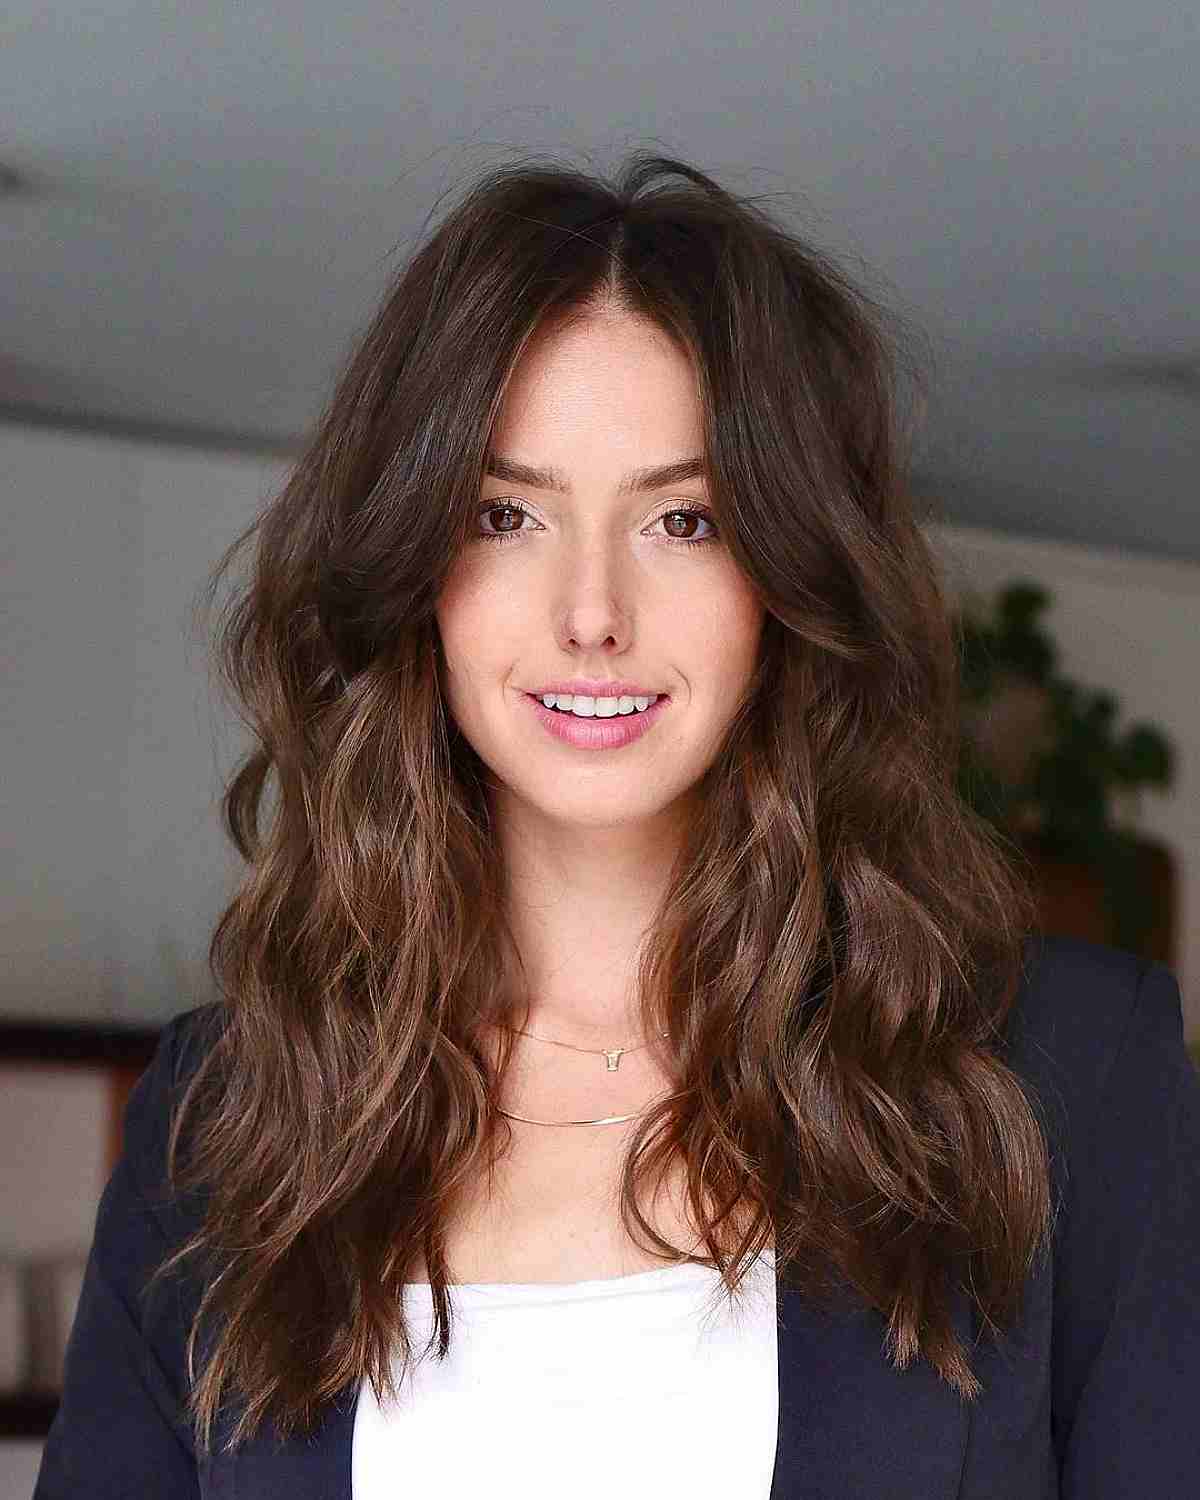 Undone Style with Curtain Bangs for Mid-Length Hair for Long Faces